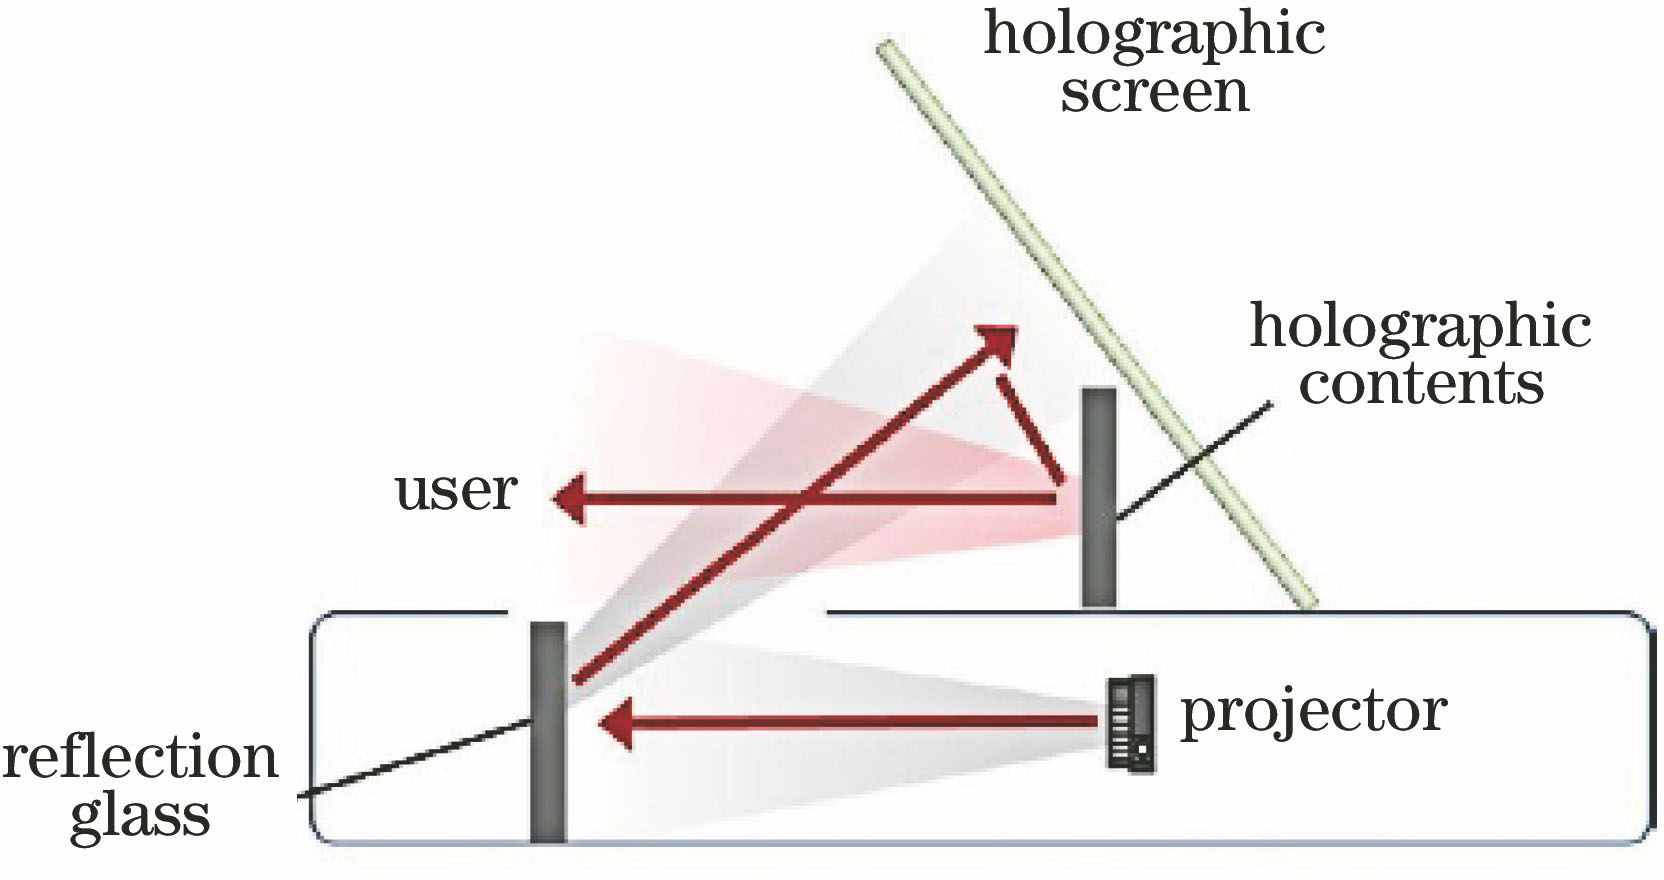 Architecture of holographic projection system[35]